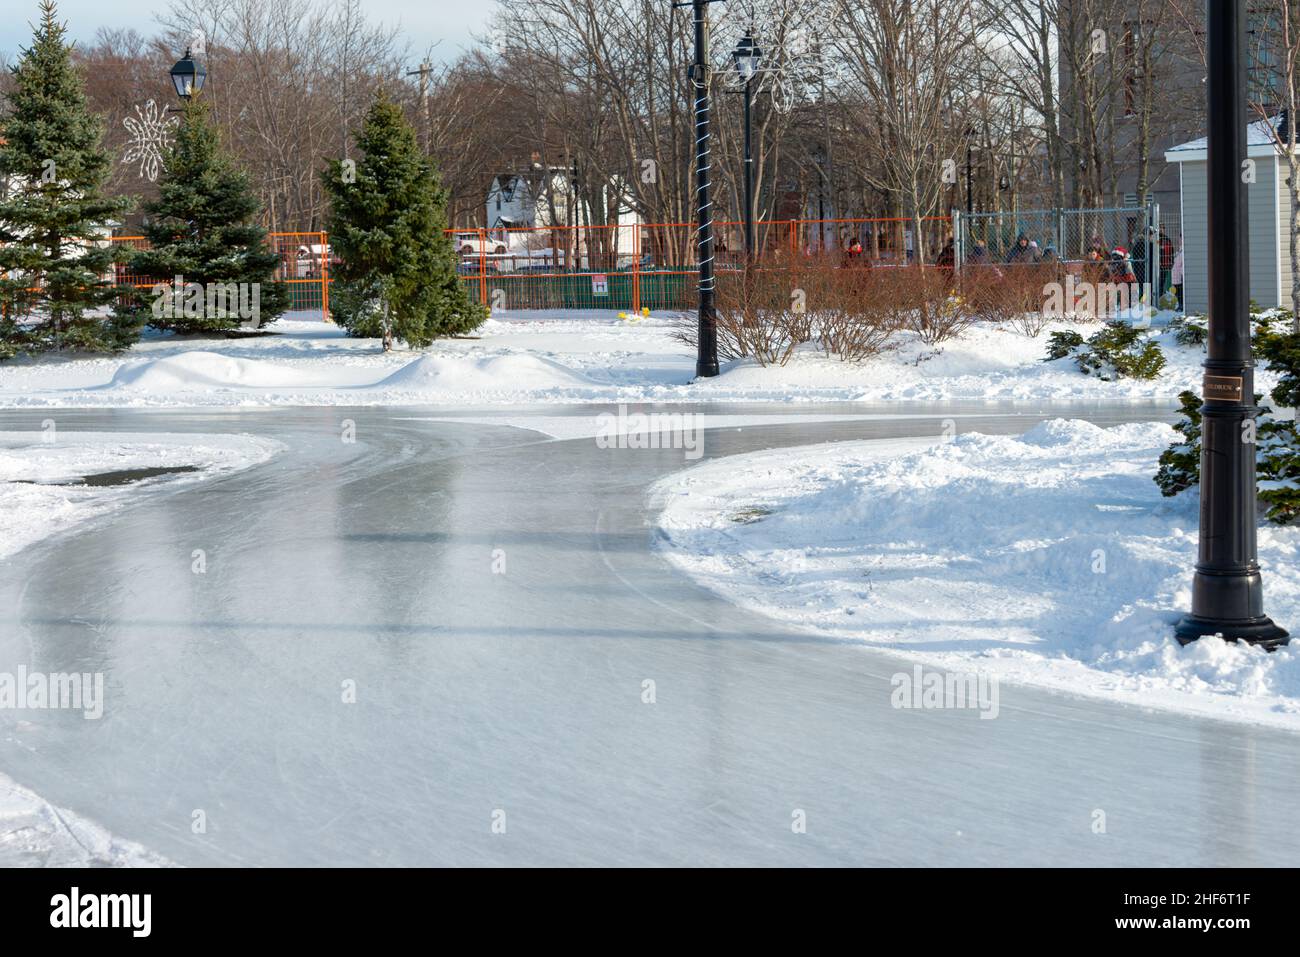 A curved ice surface at an outdoor park. There are a number of turns in the shiny smooth ice surface. There's white snow on both sides of the rink. Stock Photo